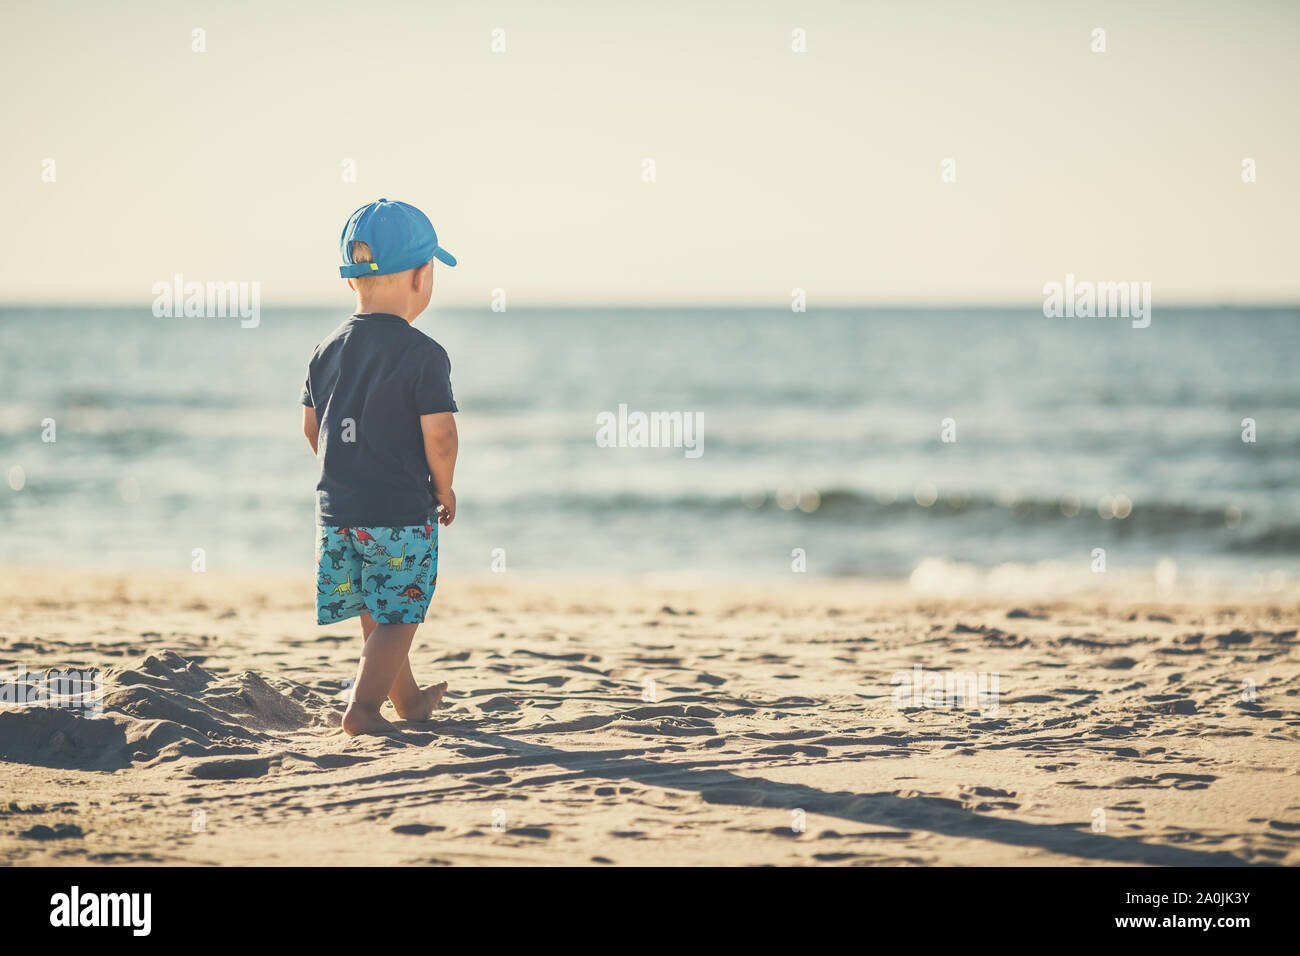 Toddler boy walking on a sunny beach. Little child walking on sand. Beautiful inspirational beach and ocean view, landscape. Stock Photo